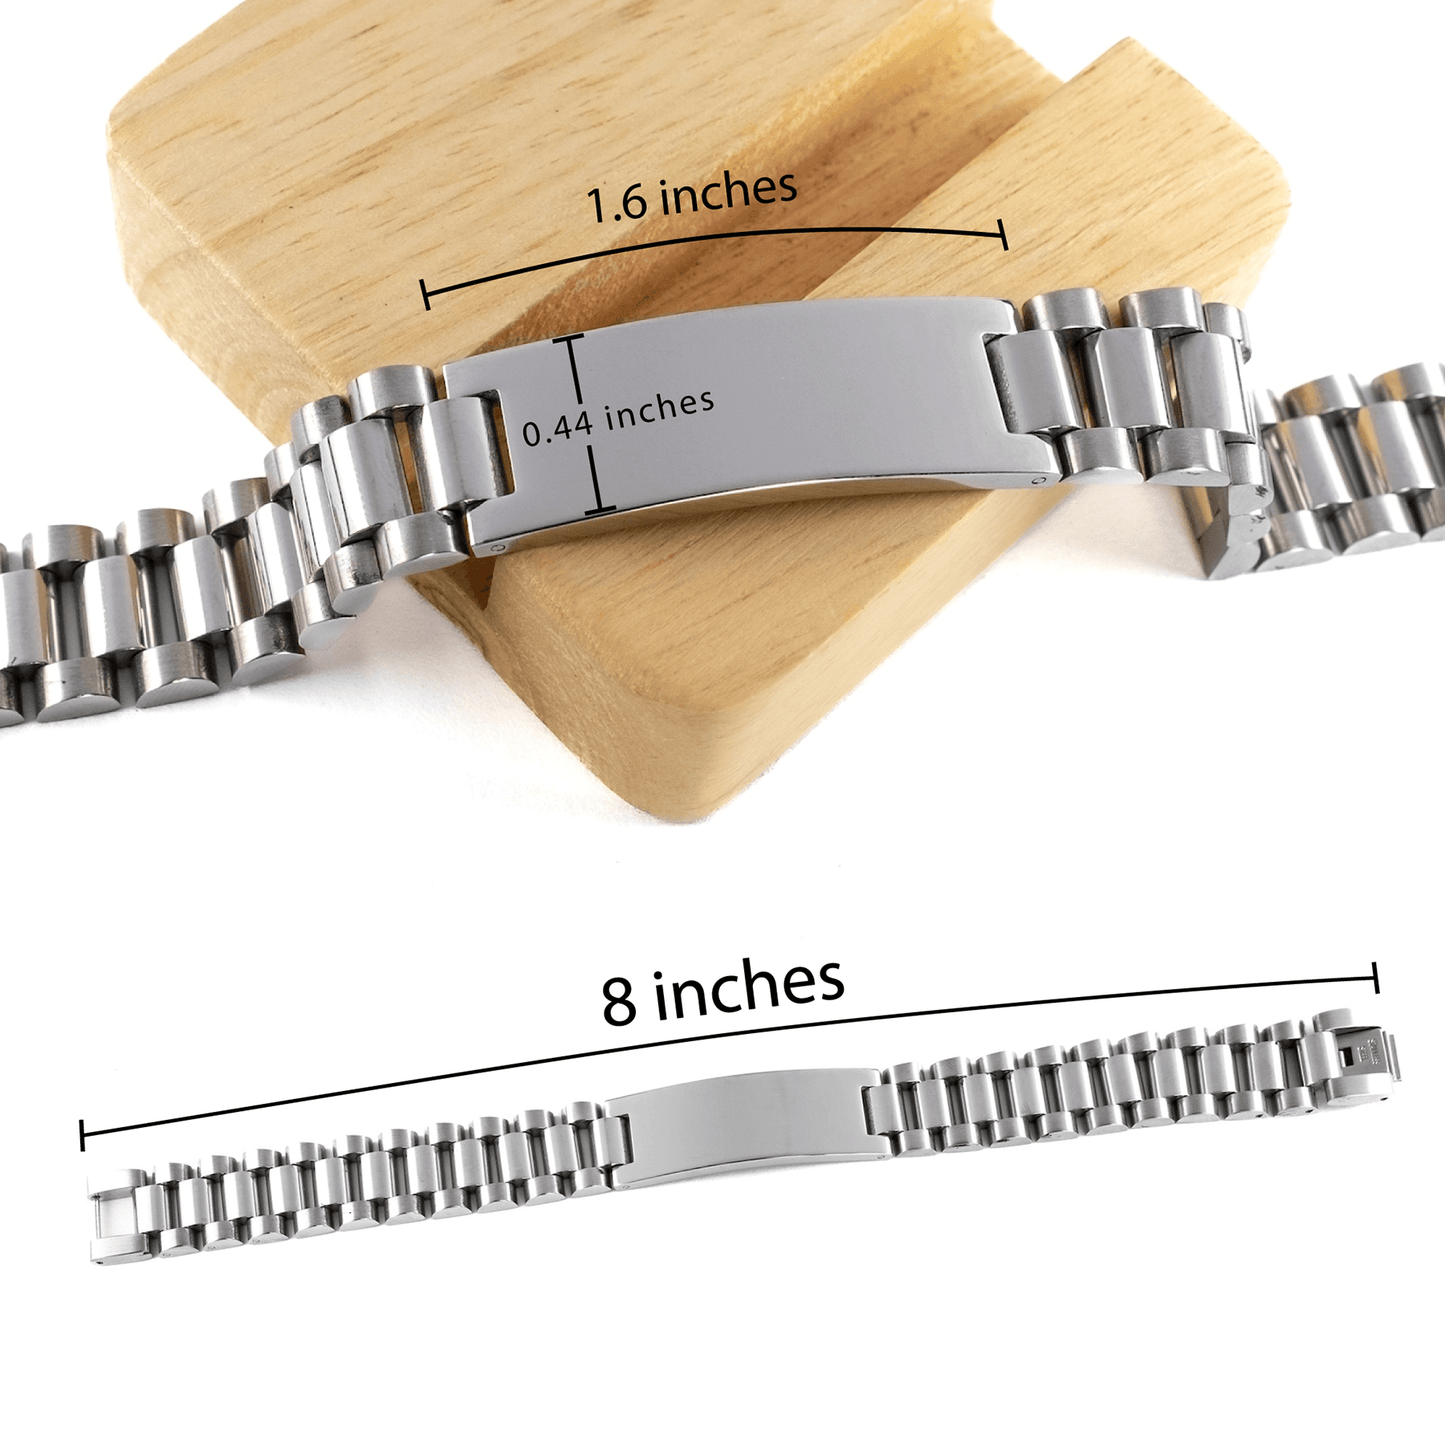 Ladder Stainless Steel Bracelet for Daughter Present, Daughter Always follow your dreams, never forget how amazing you are, Daughter Birthday Christmas Gifts Jewelry for Girls Boys Teen Men Women - Mallard Moon Gift Shop